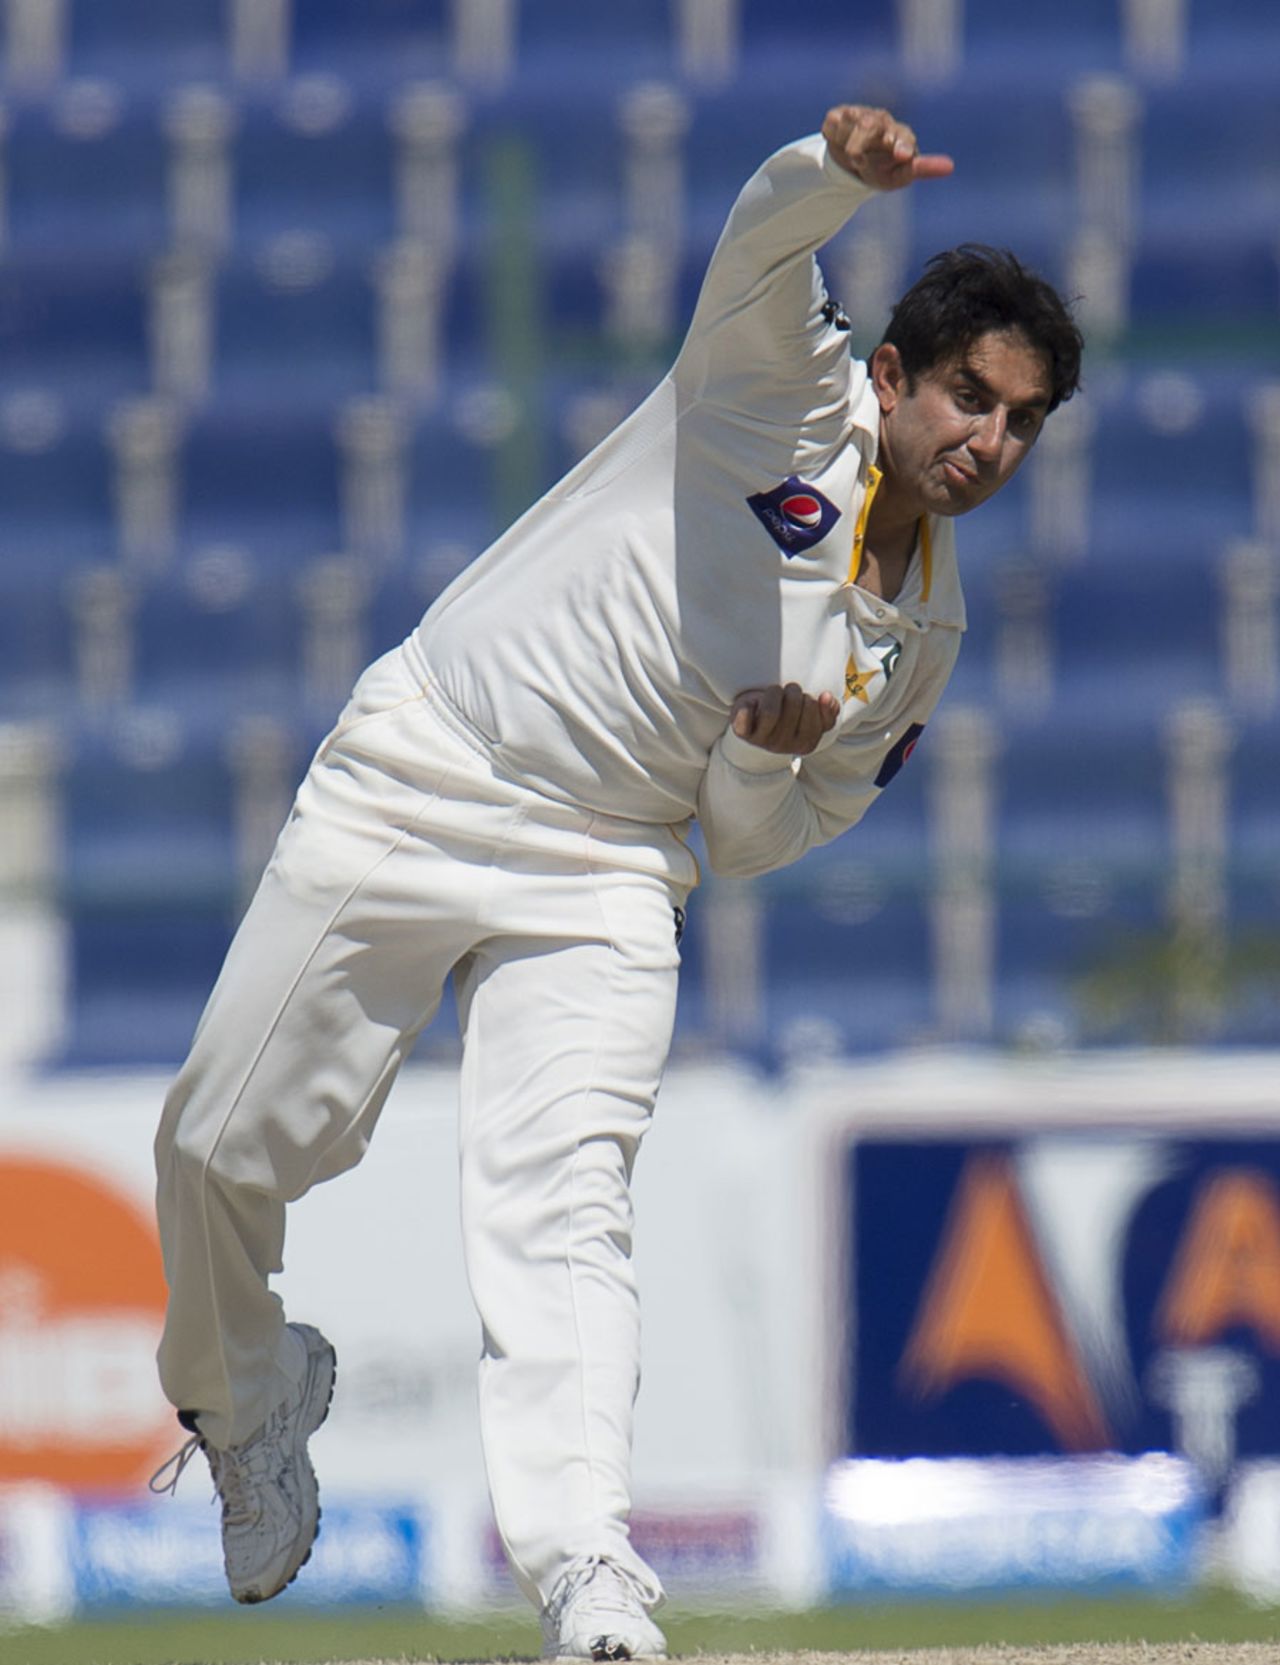 Saeed Ajmal completes his bowling action, Pakistan v South Africa, 1st Test, 4th day, Abu Dhabi, October 17, 2013